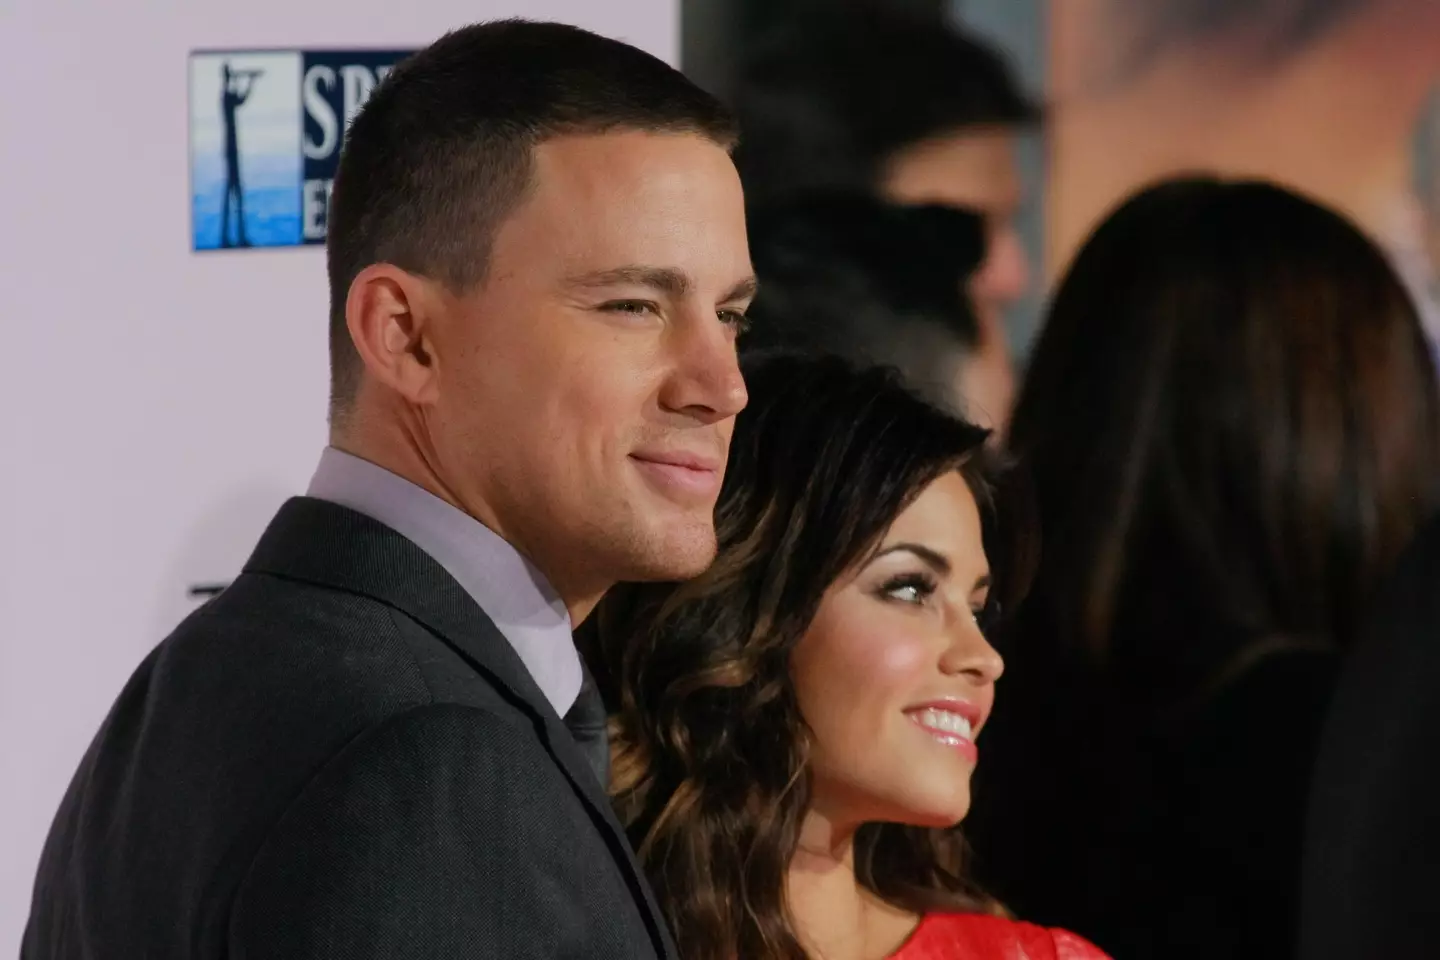 Channing Tatum and his wife Jenna Dewan at the World Premiere of "The Vow".